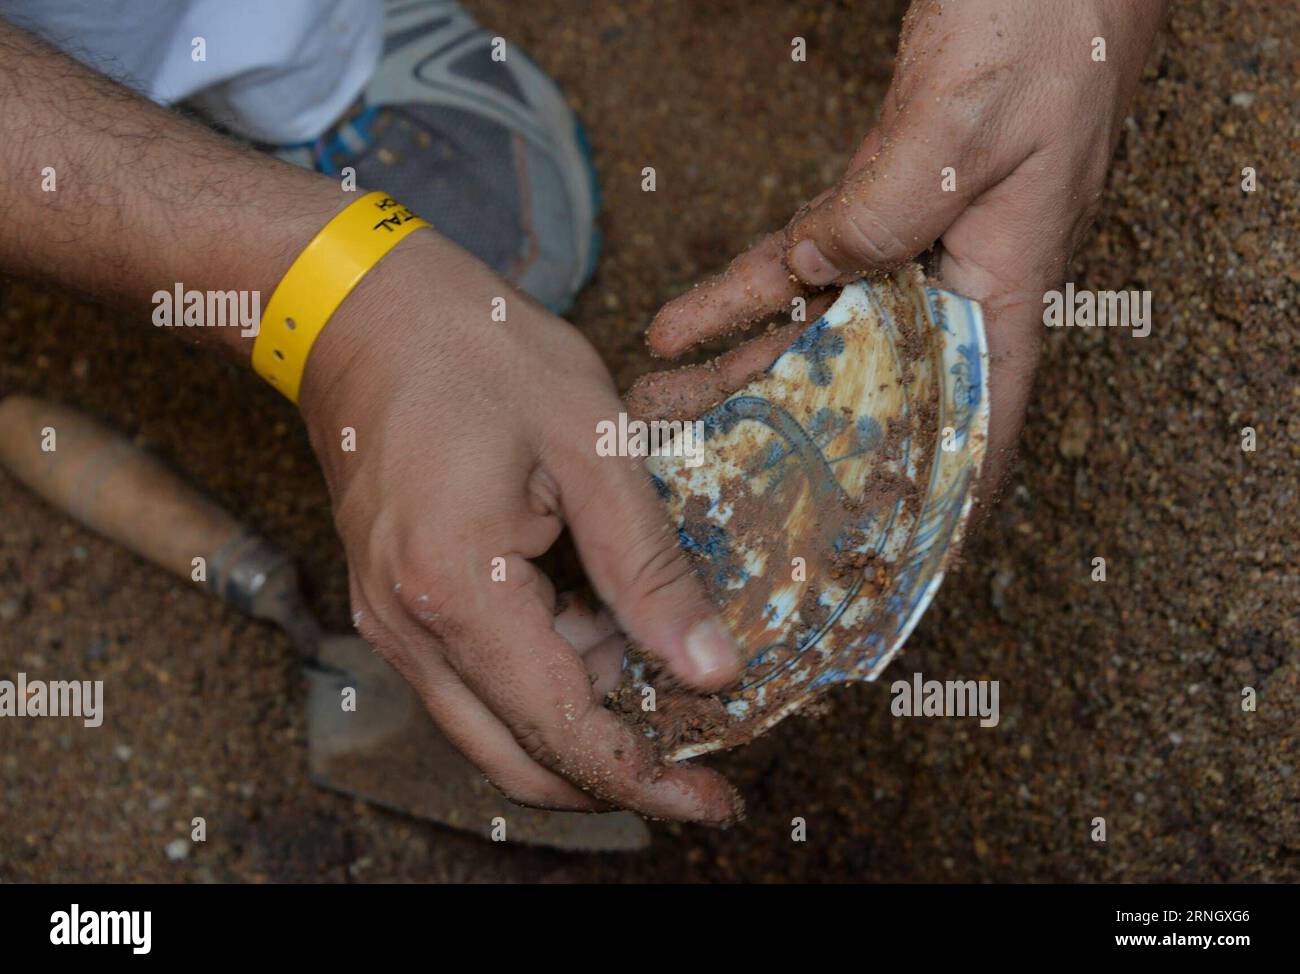 (161015) -- ACAPULCO (MEXICO), Oct. 15, 2016 -- Photo taken on Oct. 5, 2016, shows an archaeologist working on an antique Chinese porcelain fragment in the city of Acapulco, Mexico. A new archaeological find announced on Friday in Mexico attests to China s age-old vocation as an exporting powerhouse. Mexican archaeologists have uncovered thousands of fragments of a 400-year-old shipment of Chinese export-quality porcelain that was long buried in the Pacific Coast port of Acapulco. Meliton Tapia/) (lr) MEXICO-ACAPULCO-ANCIENT CHINESE EXPORT-QUALITY PORCELAIN -DISCOVERY INAH PUBLICATIONxNOTxINxC Stock Photo